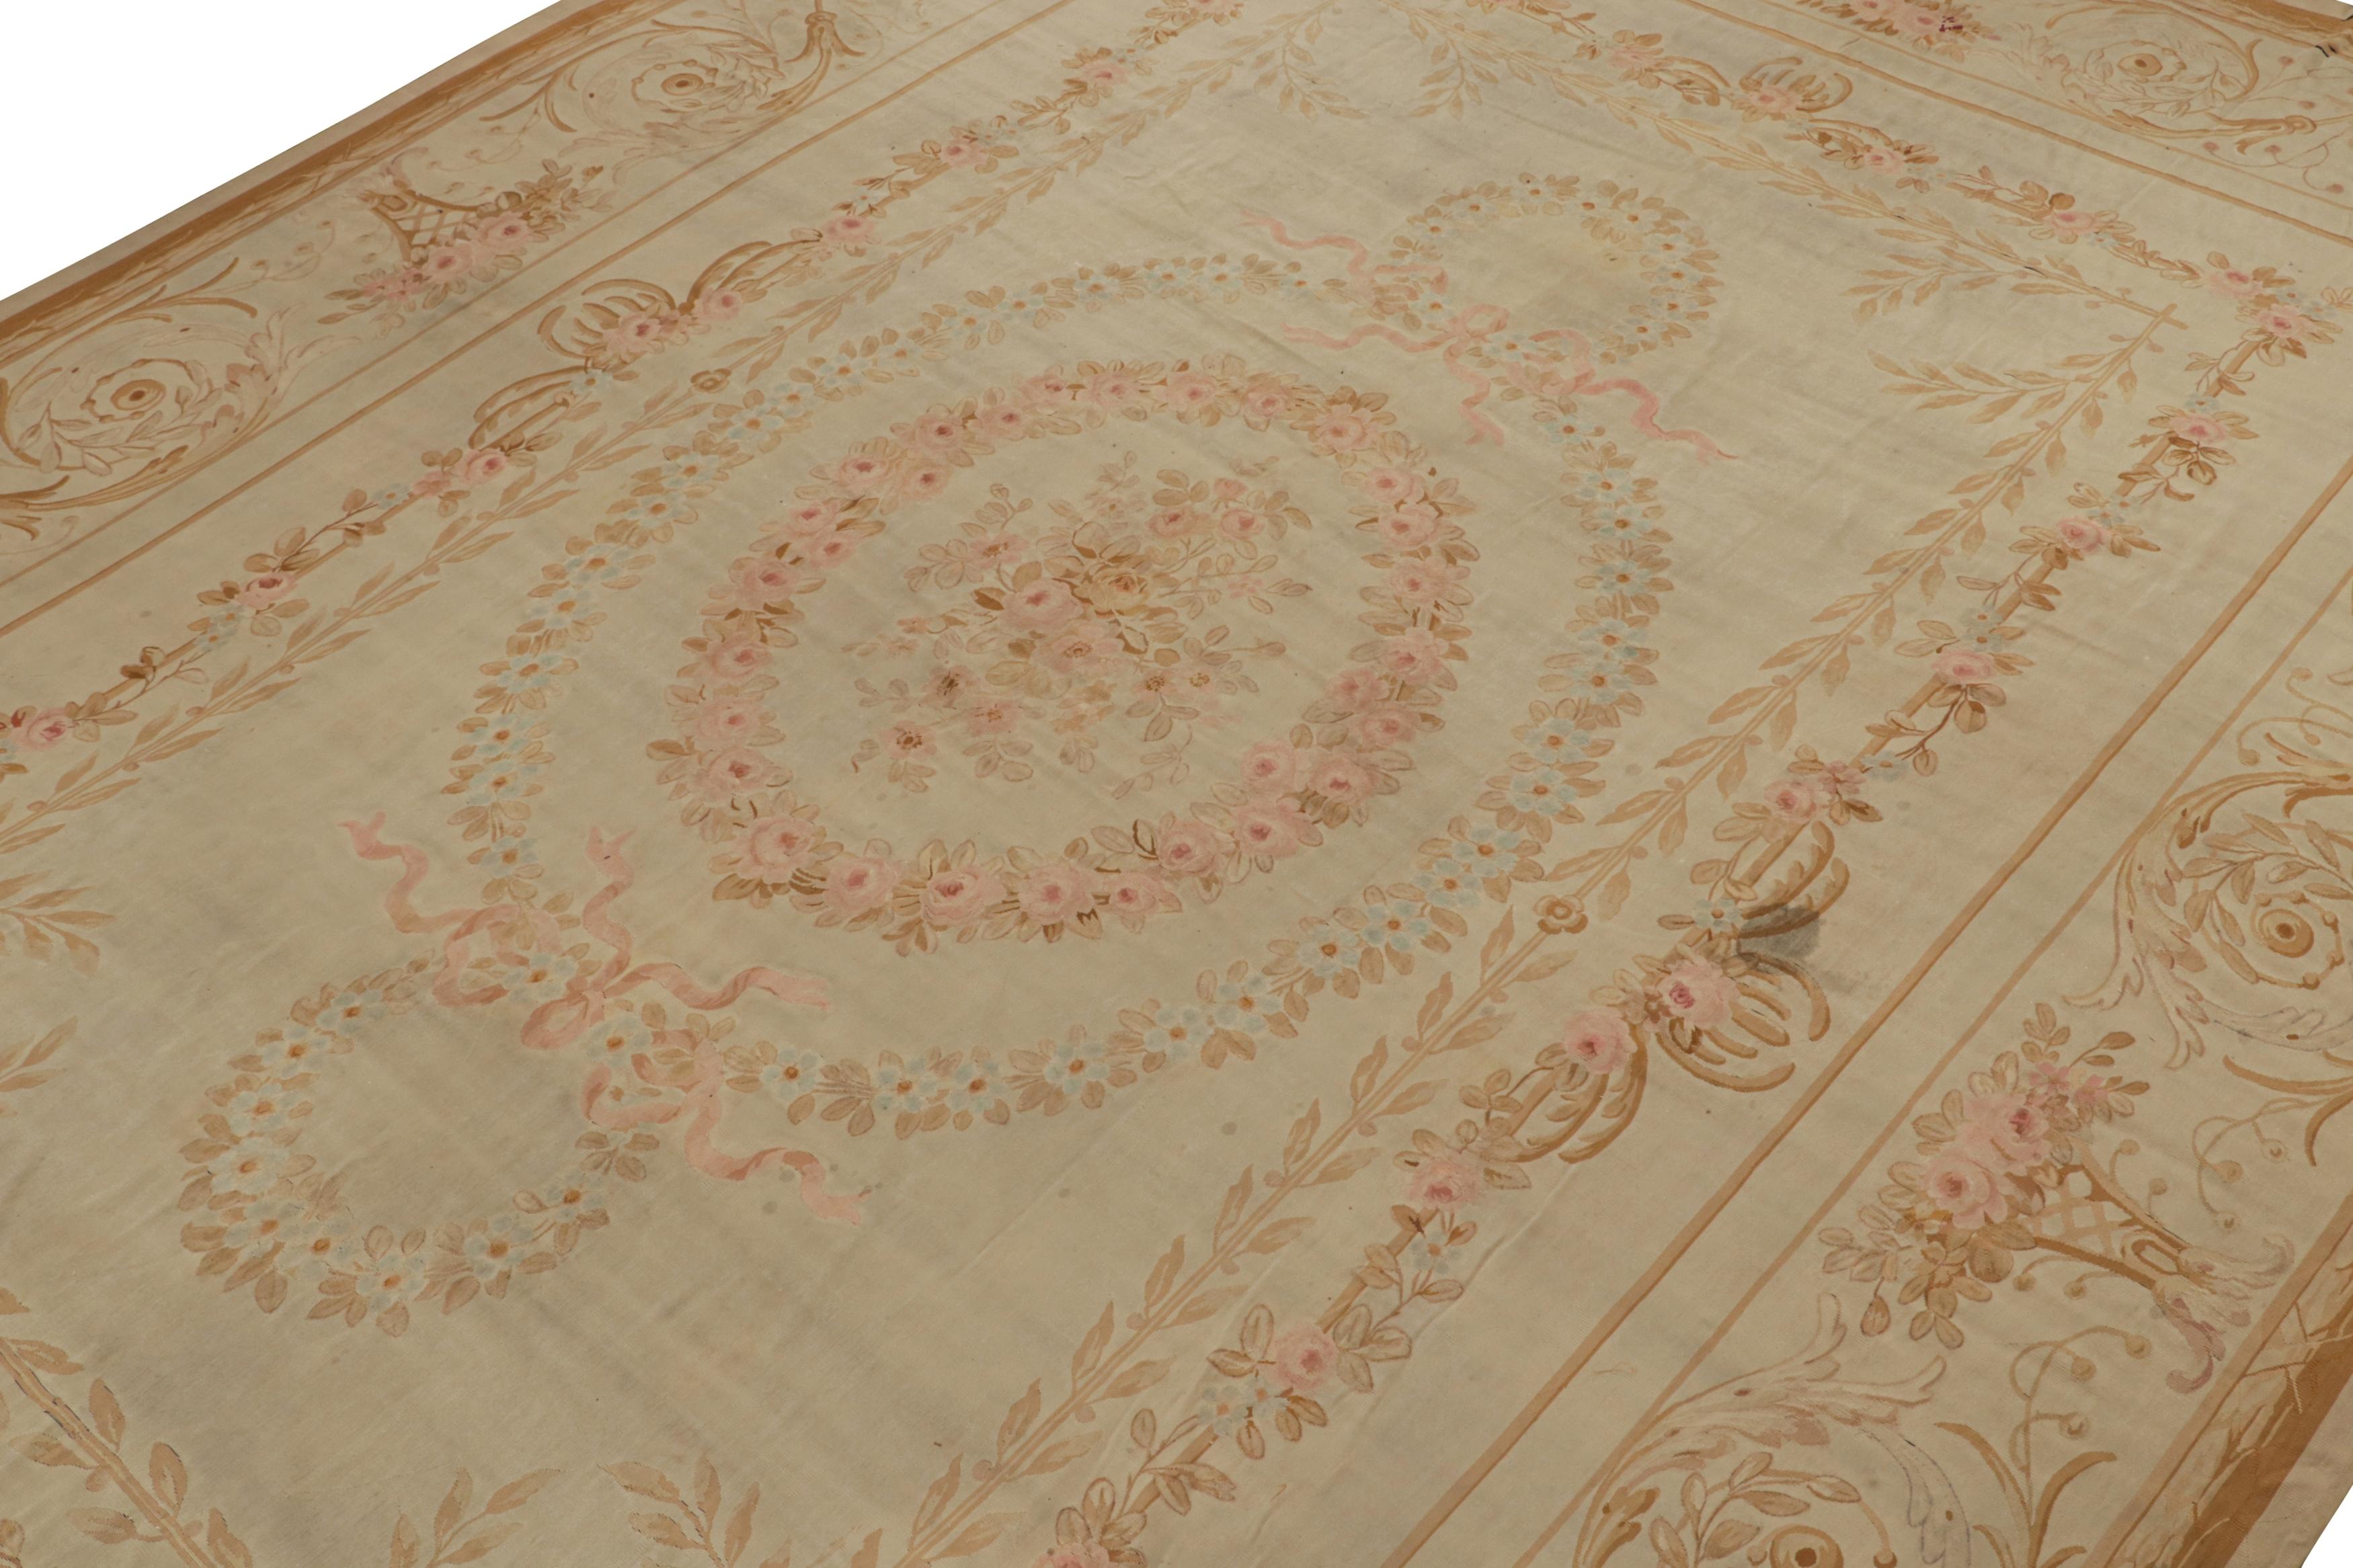 Hand-Woven Oversized Antique Aubusson Flatweave Floral Rug in Beige & Pink For Sale